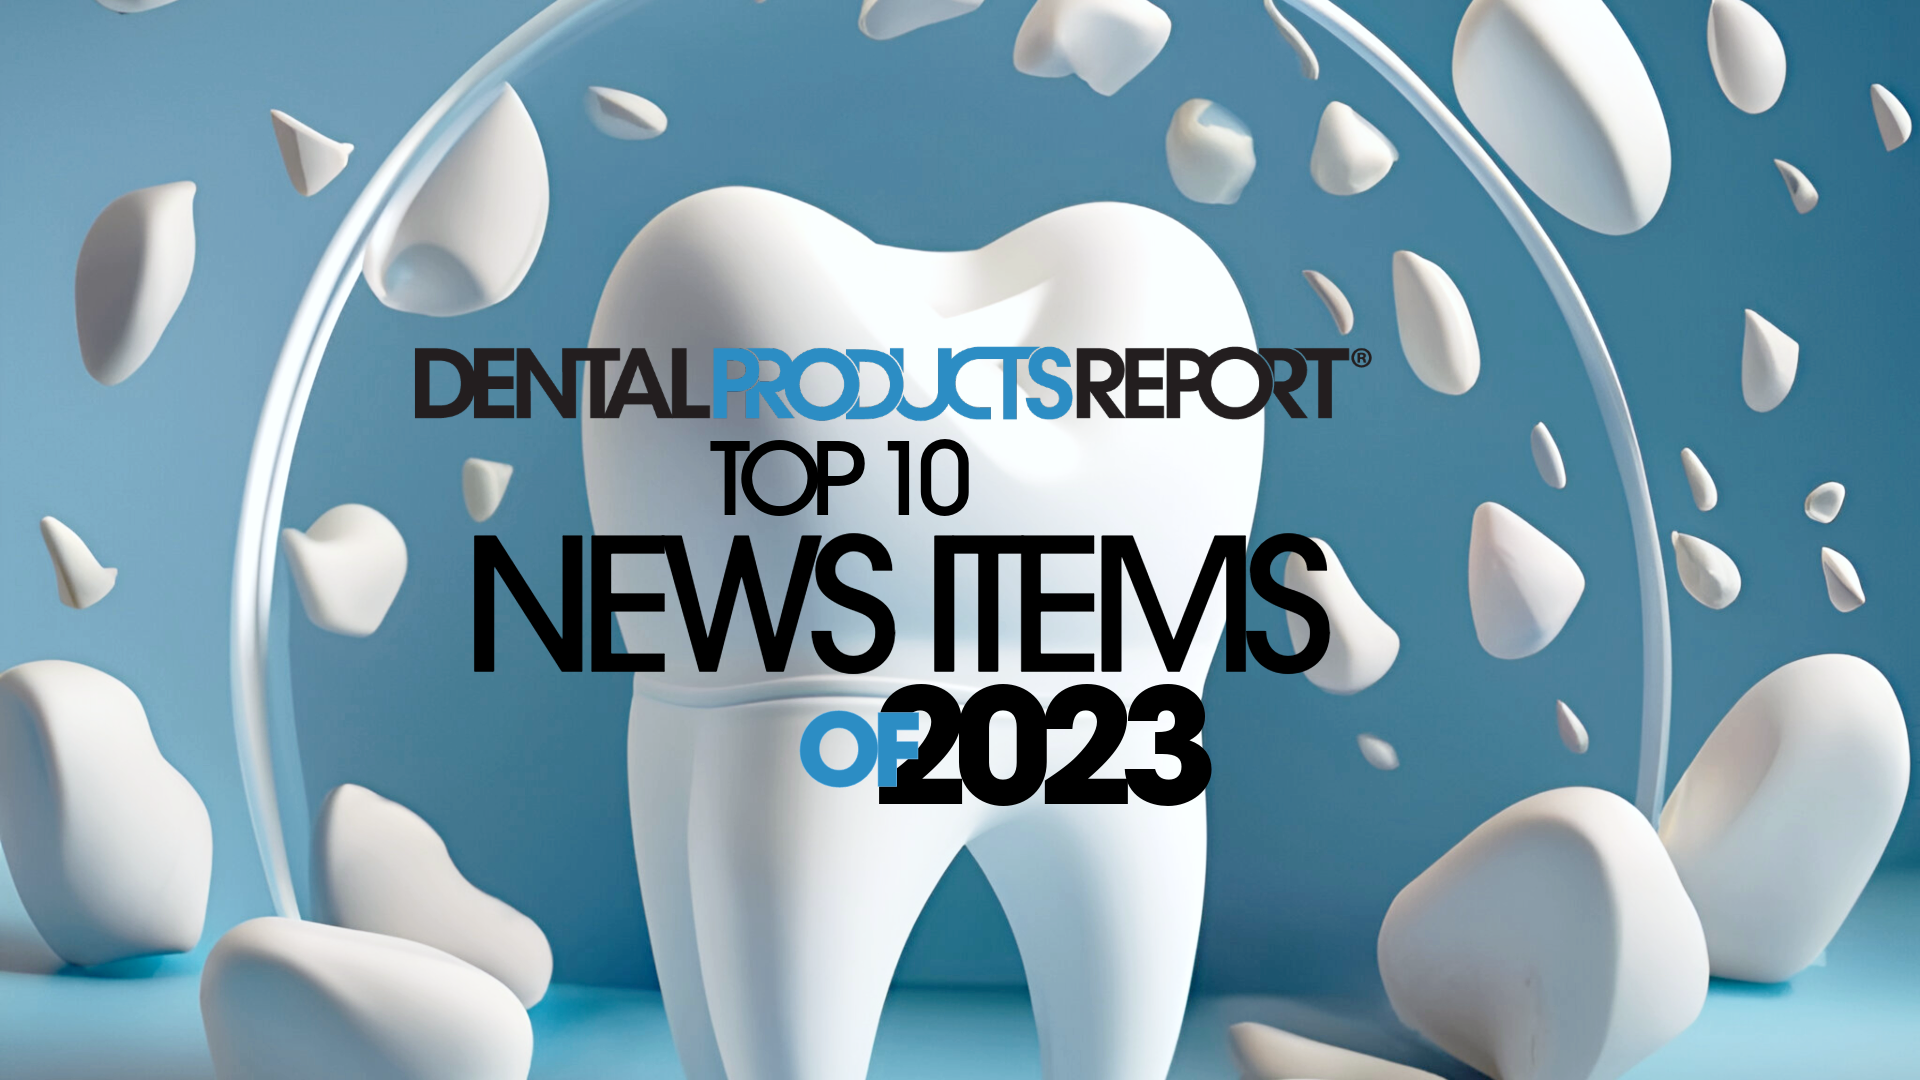 Top 10 Dental Products Report News Items of 2023